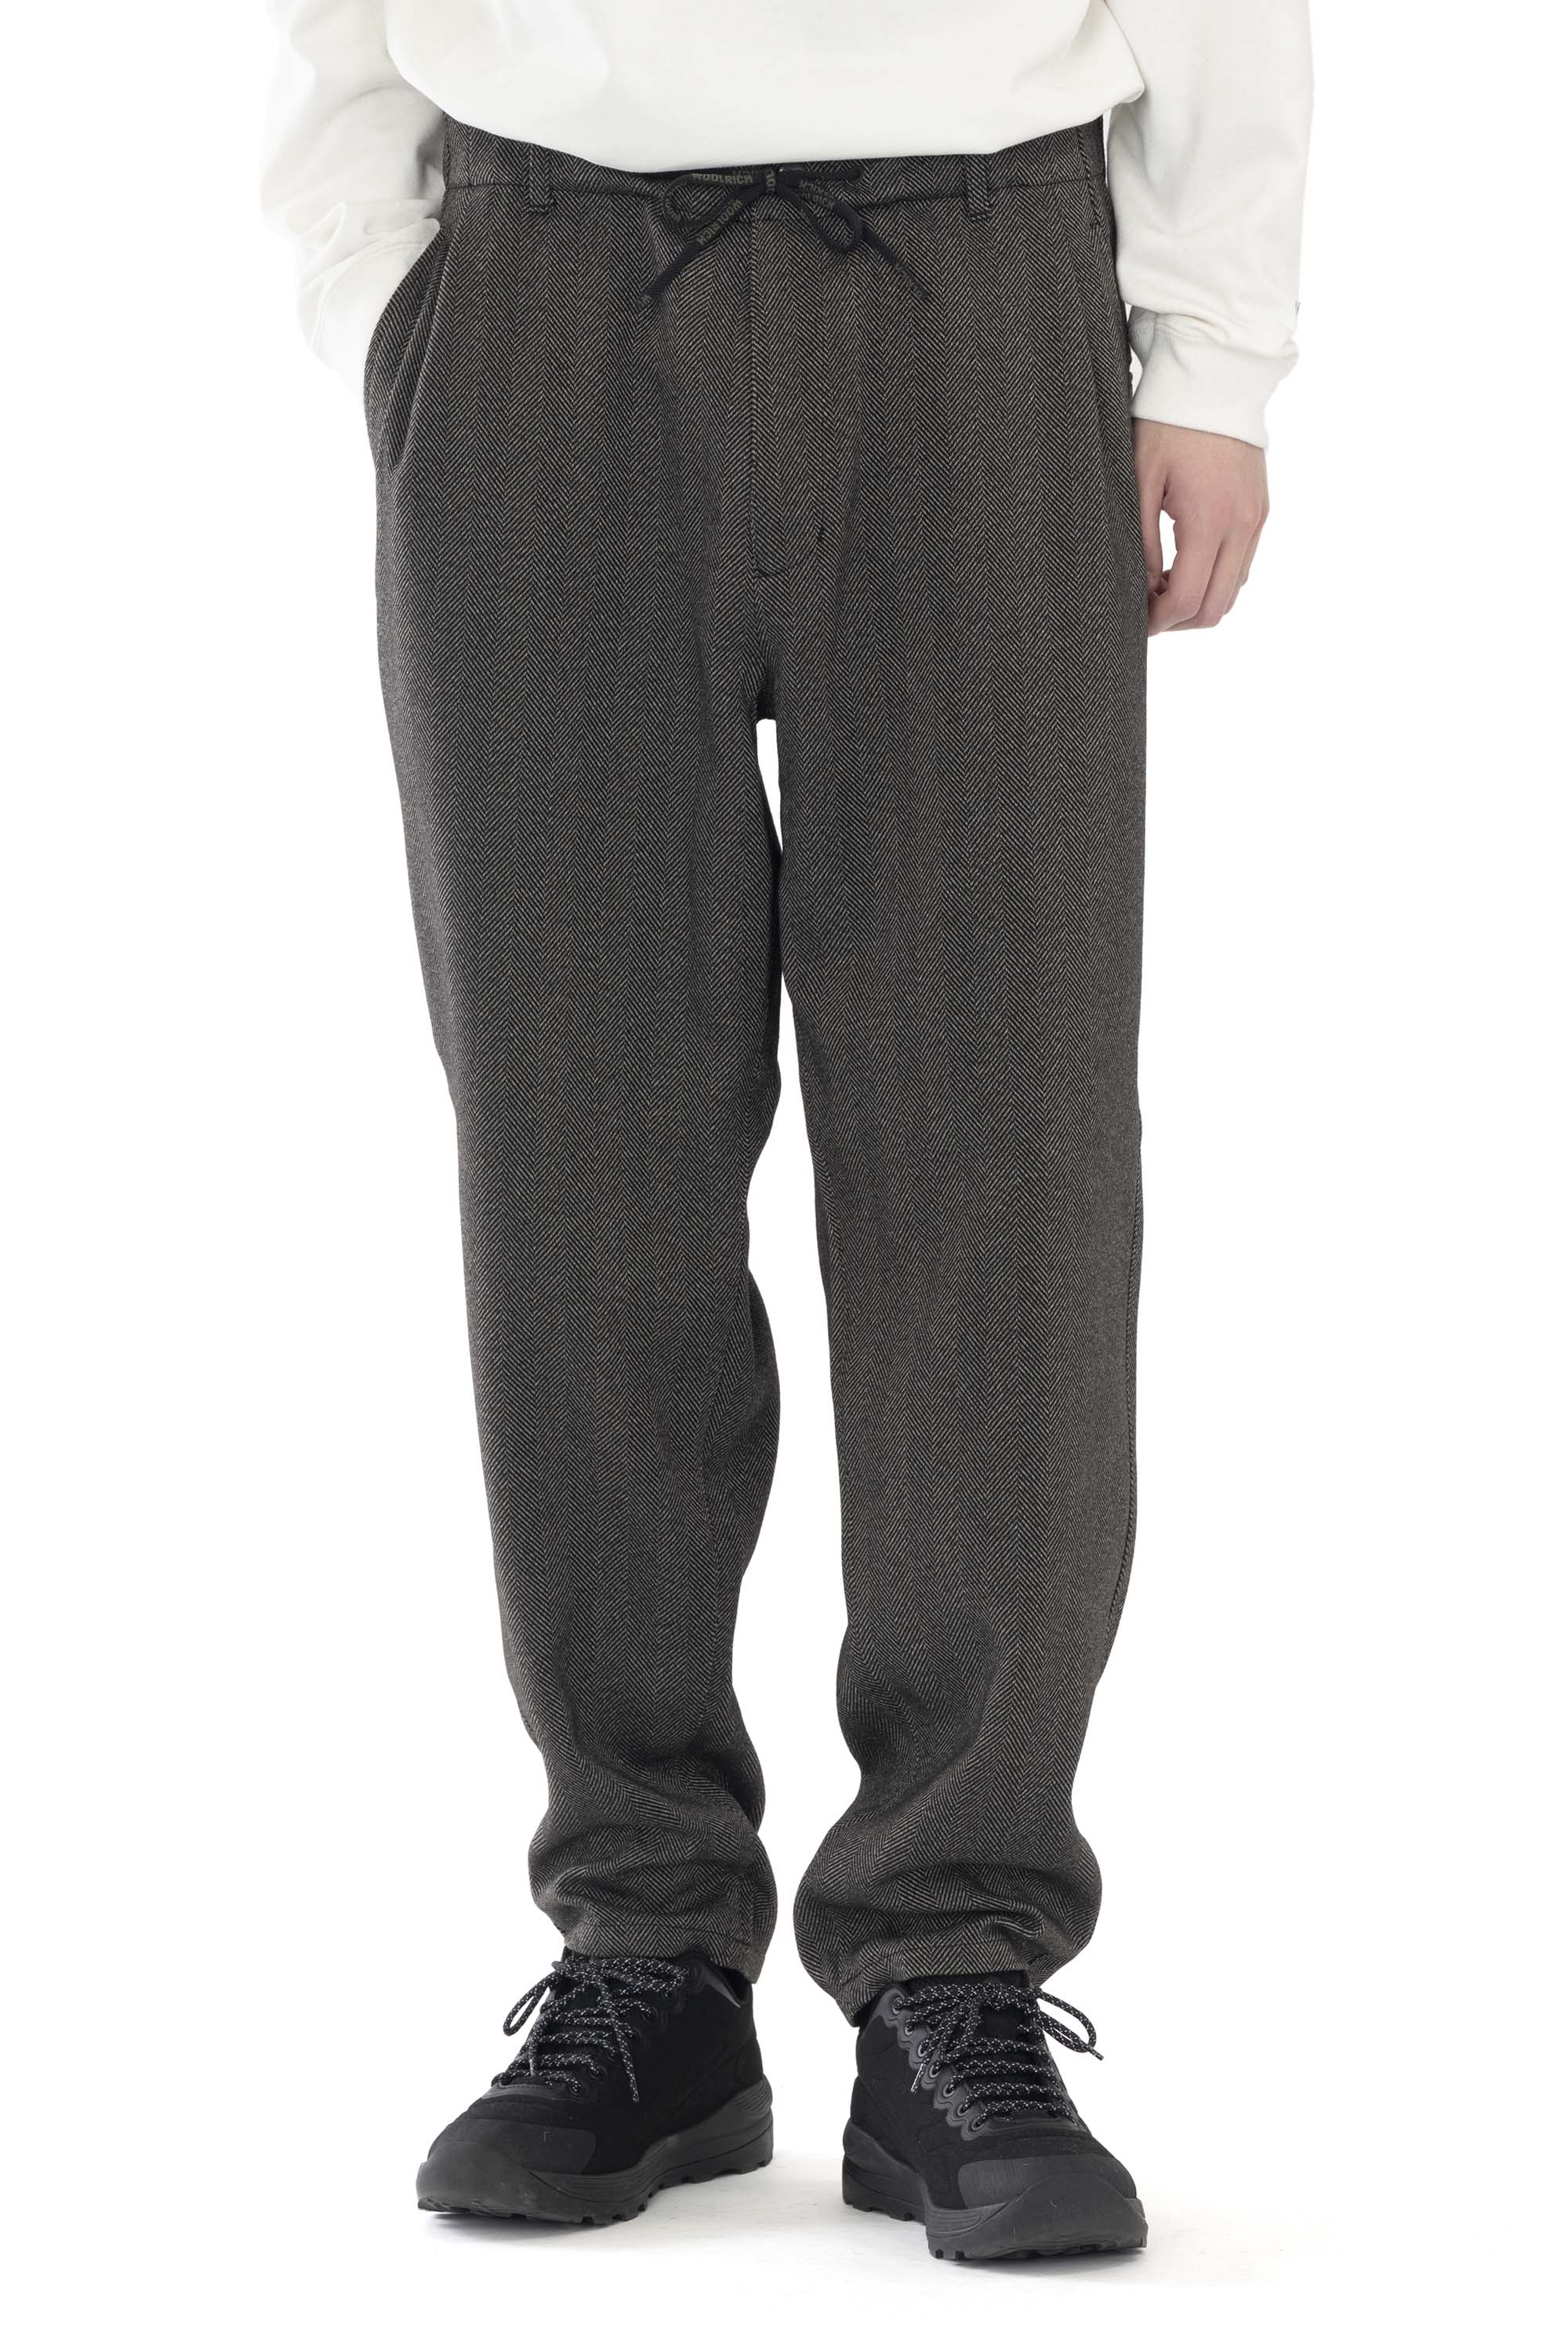 WARM RELAX PANTS 2.0